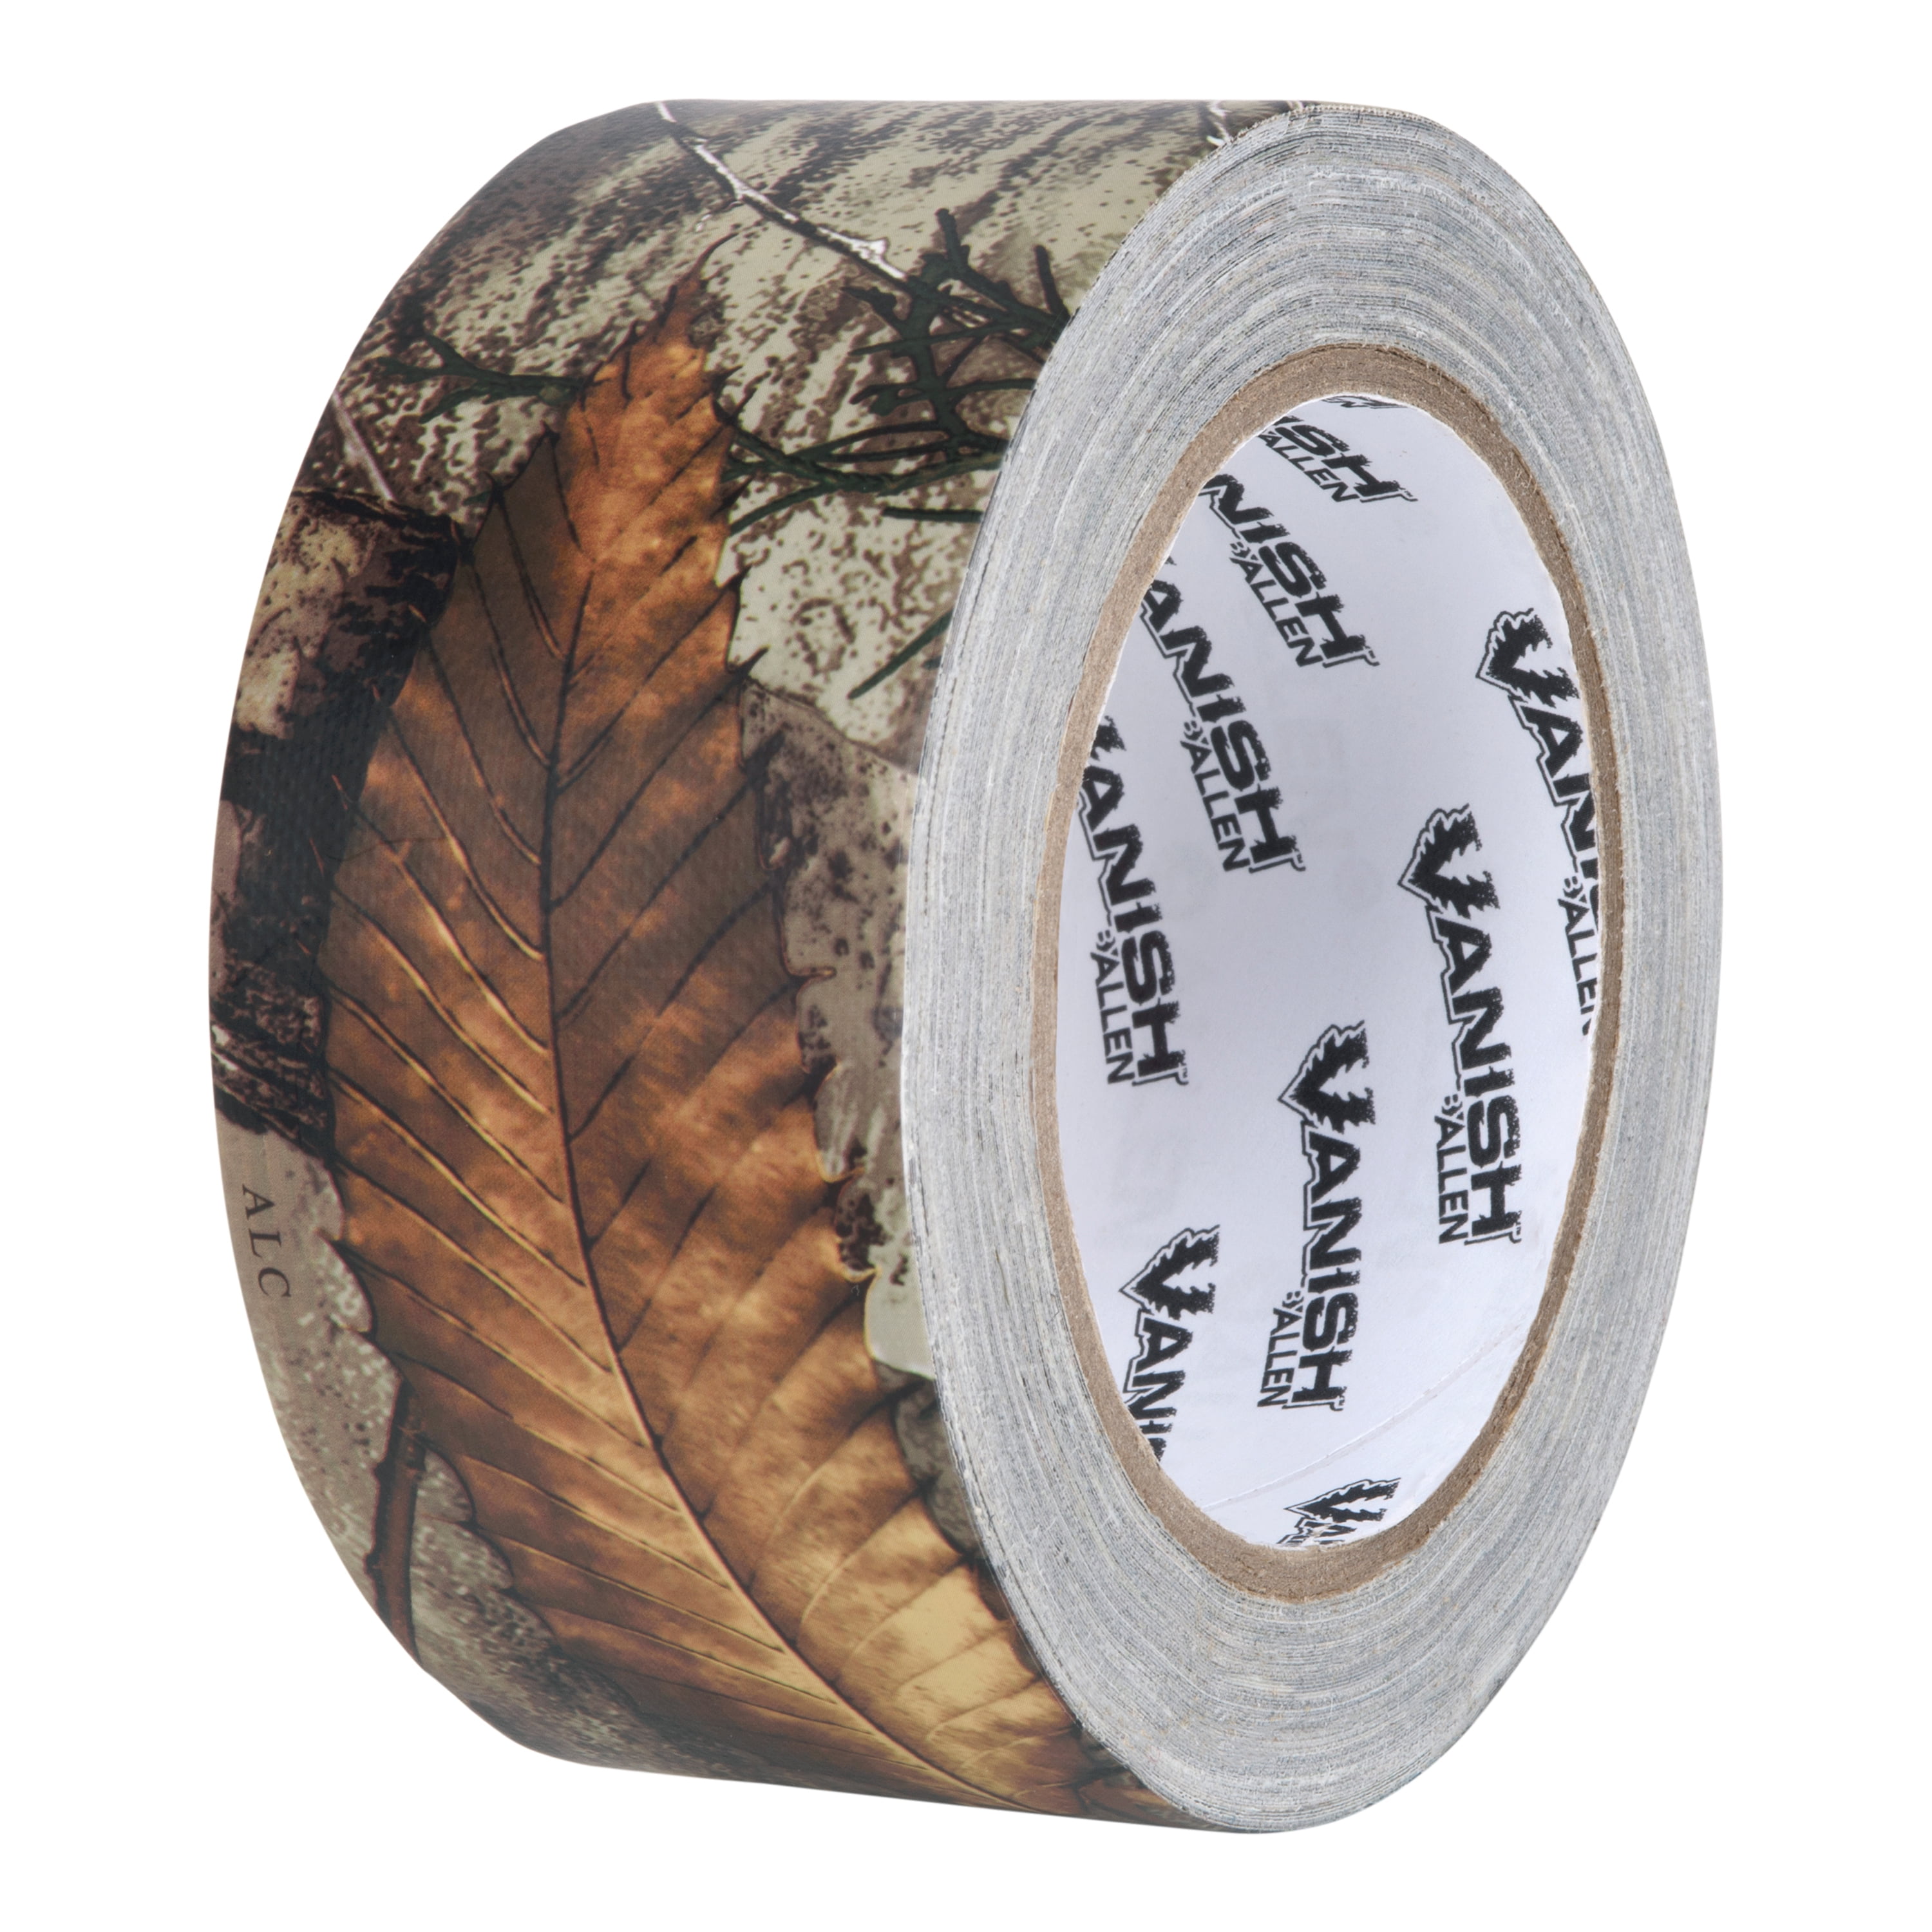 Hunter Hunting Specialties Camouflage No-Mar Gun & Bow Self-adhesive Tape Wrap A 